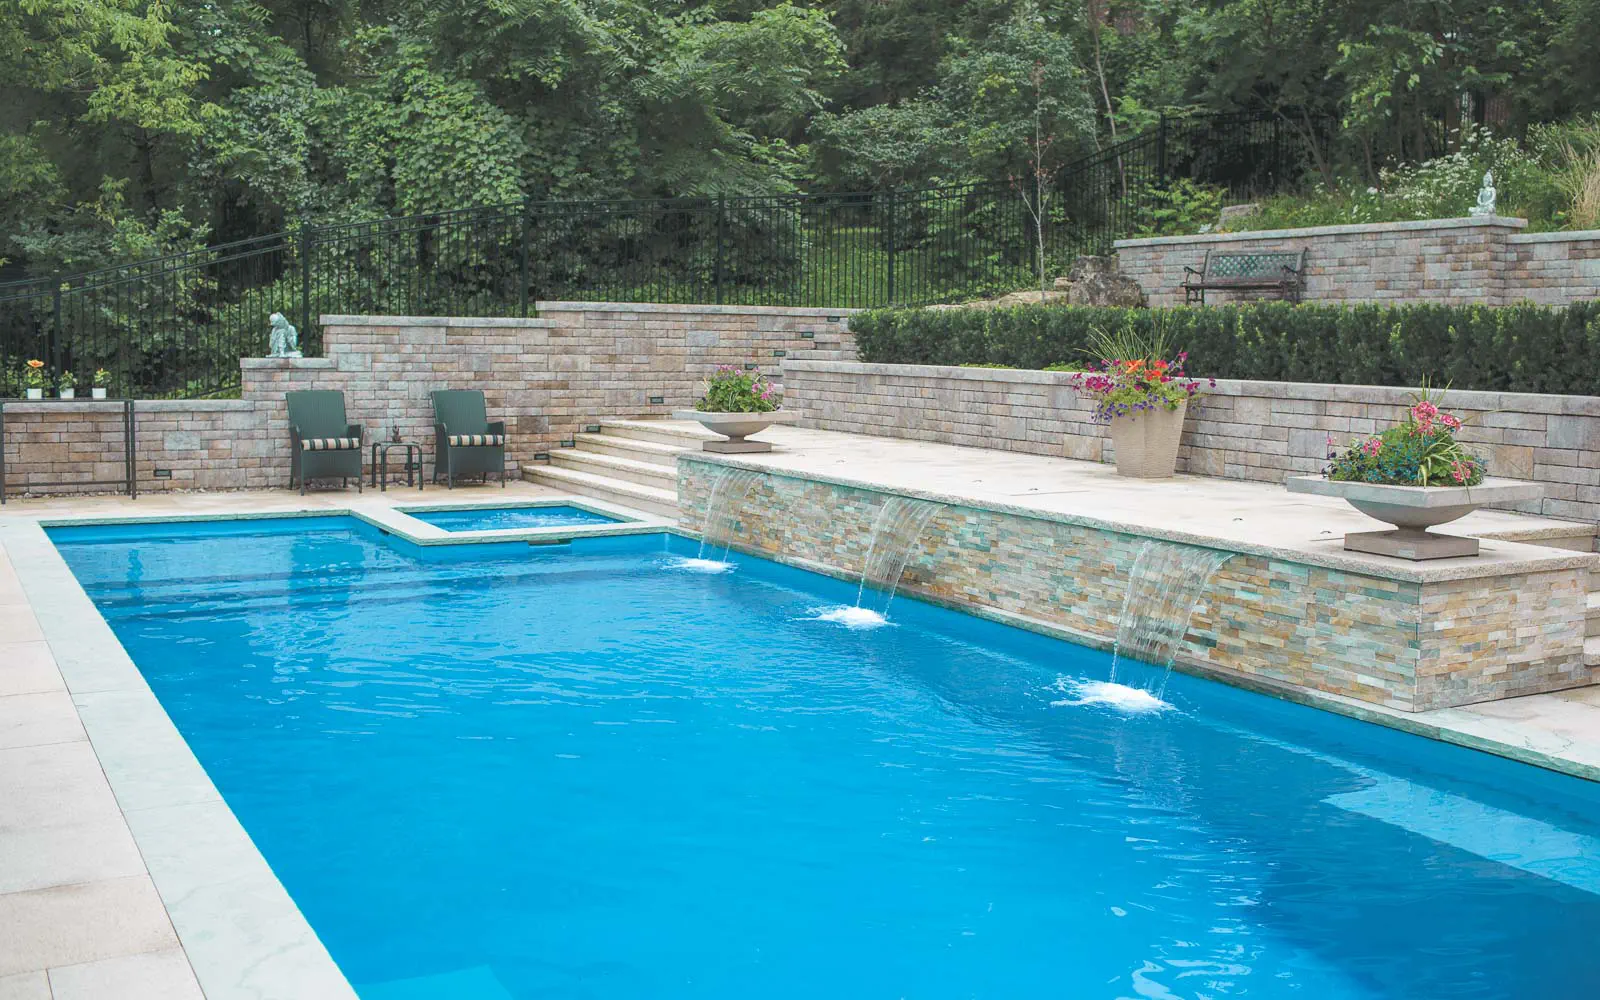 The Ultimate, a fiberglass pool design manufactured by Leisure Pools